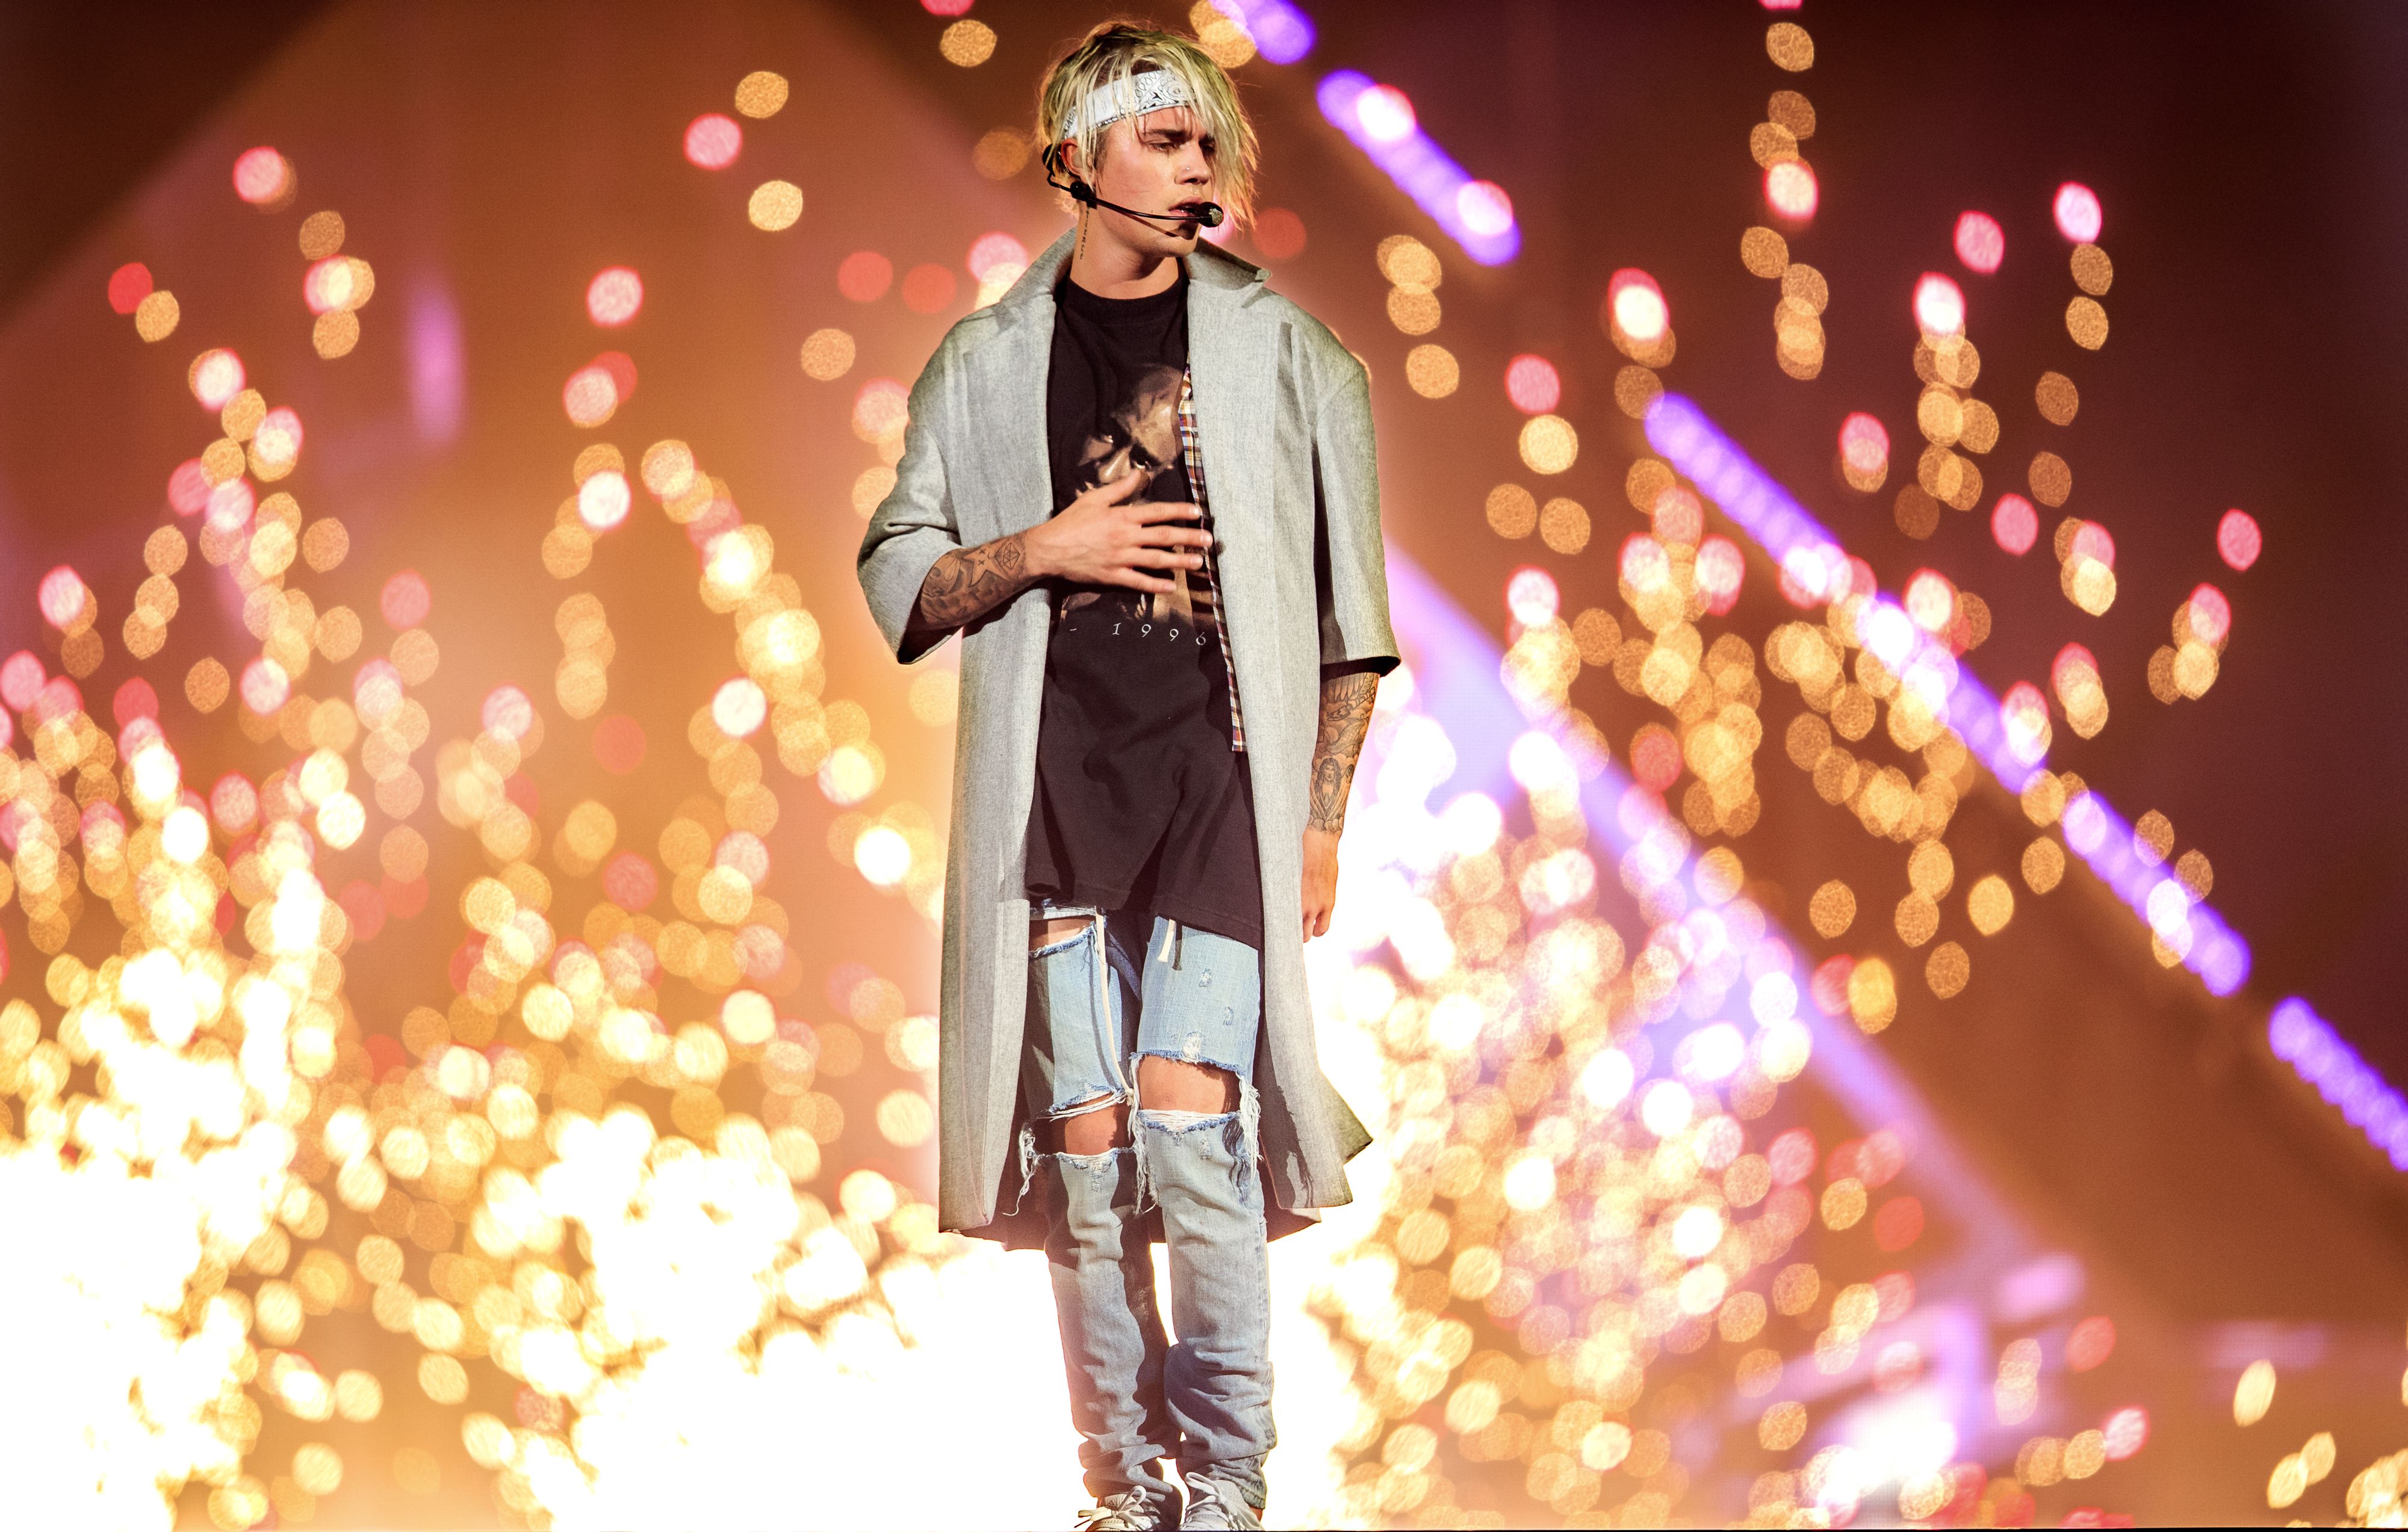 Justin Bieber Concert Wallpaper​-Quality Image and Transparent PNG Free Clipart